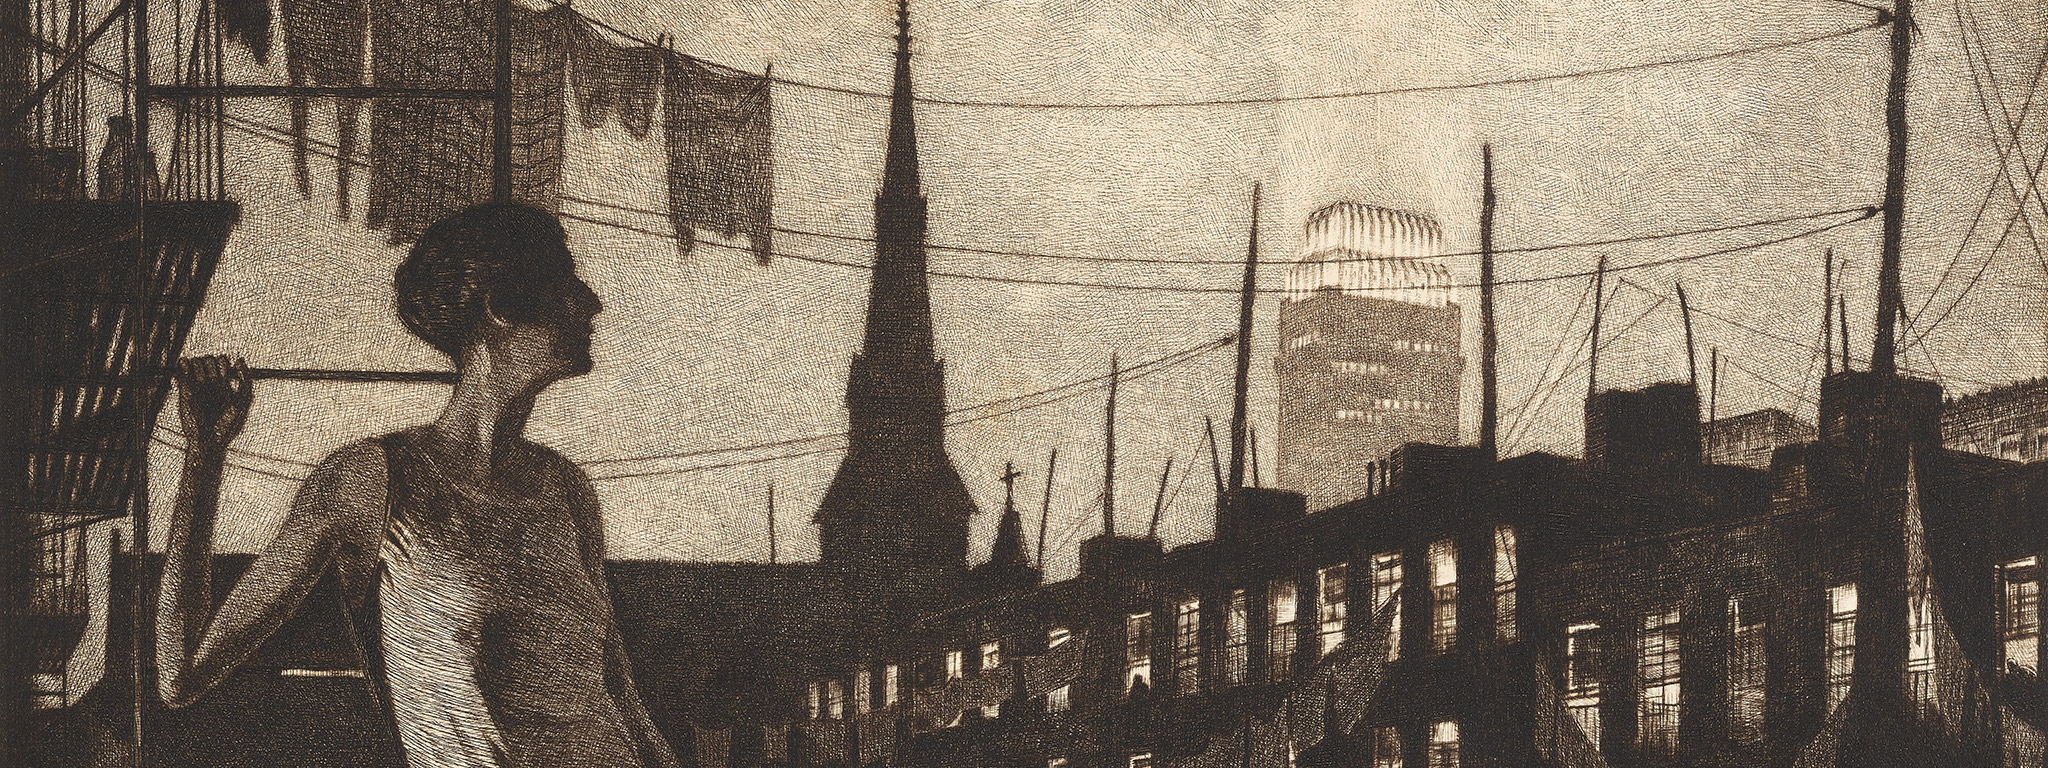 Glow of the City (detail), 1929, Martin Lewis, drypoint on ivory laid paper. The Huntington Library, Art Collections, and Botanical Gardens. Purchased with funds from Russel I. and Hannah S. Kully. © Estate of Martin Lewis